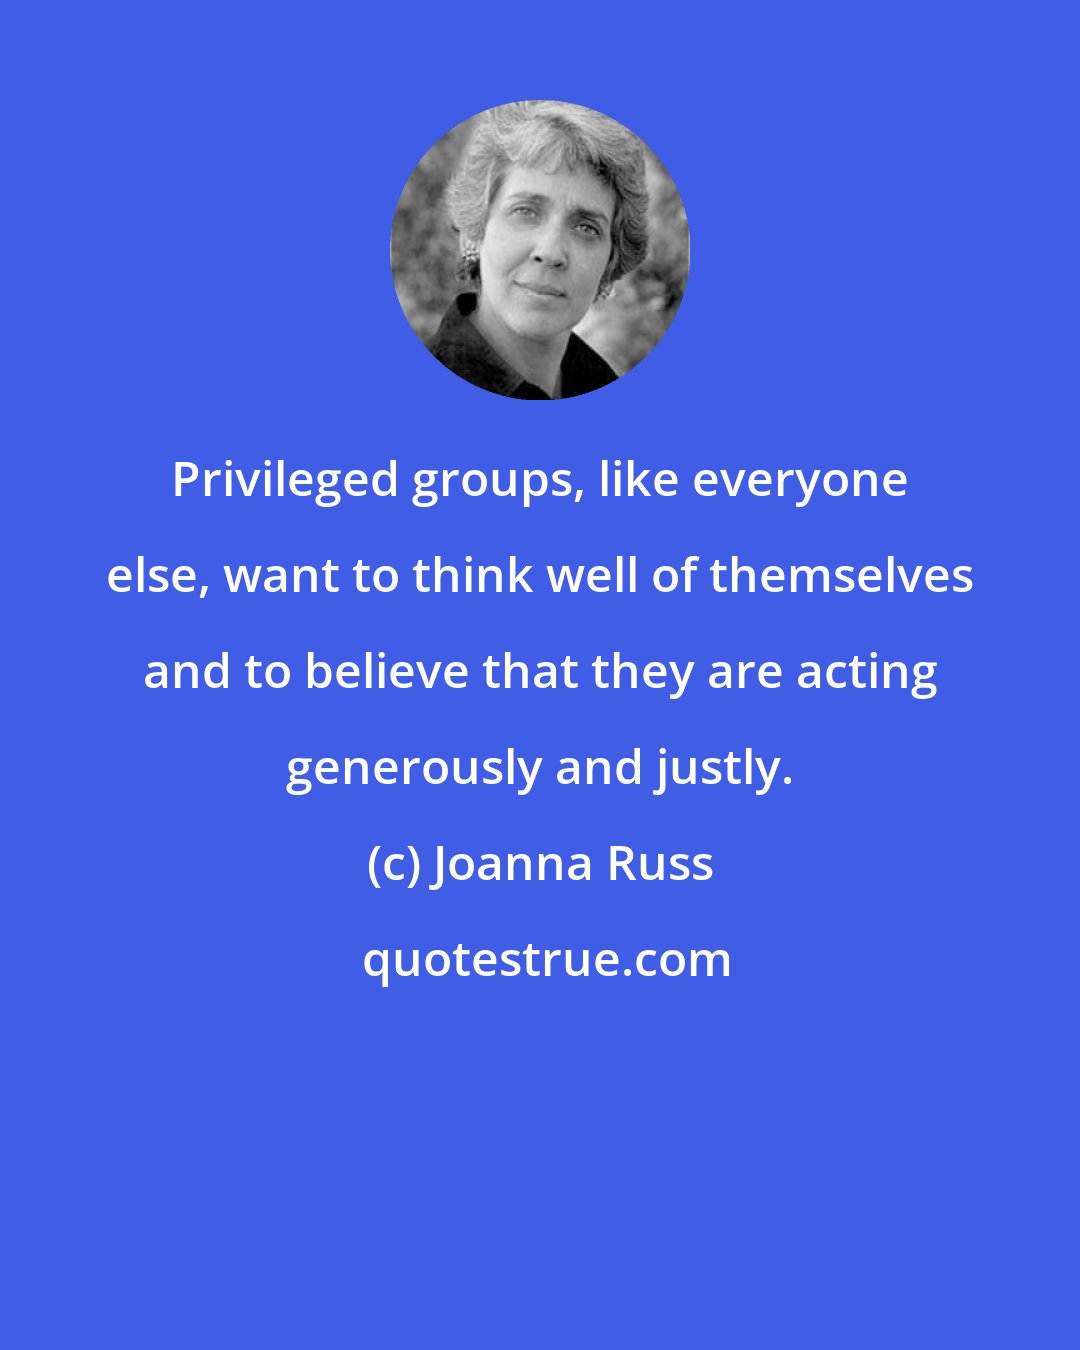 Joanna Russ: Privileged groups, like everyone else, want to think well of themselves and to believe that they are acting generously and justly.